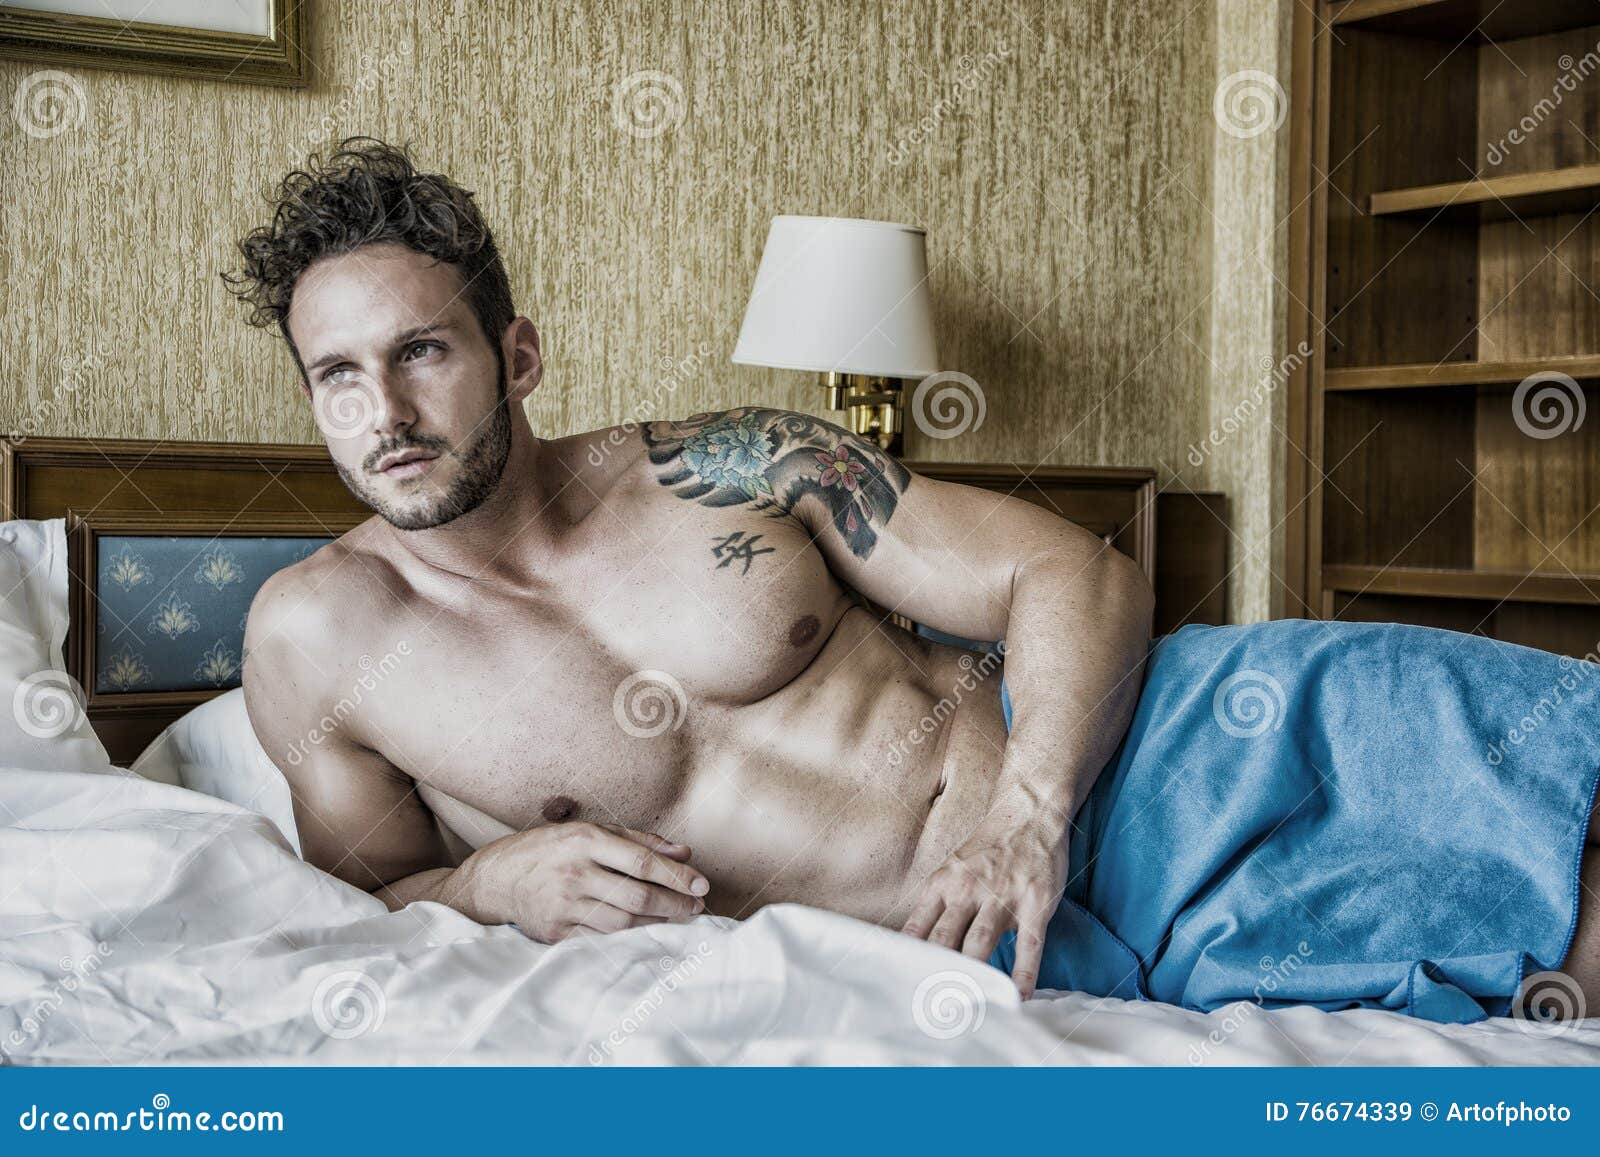 Shirtless Male Model Lying Alone On His Bed Stock Image Image Of Lonely Loneliness 76674339